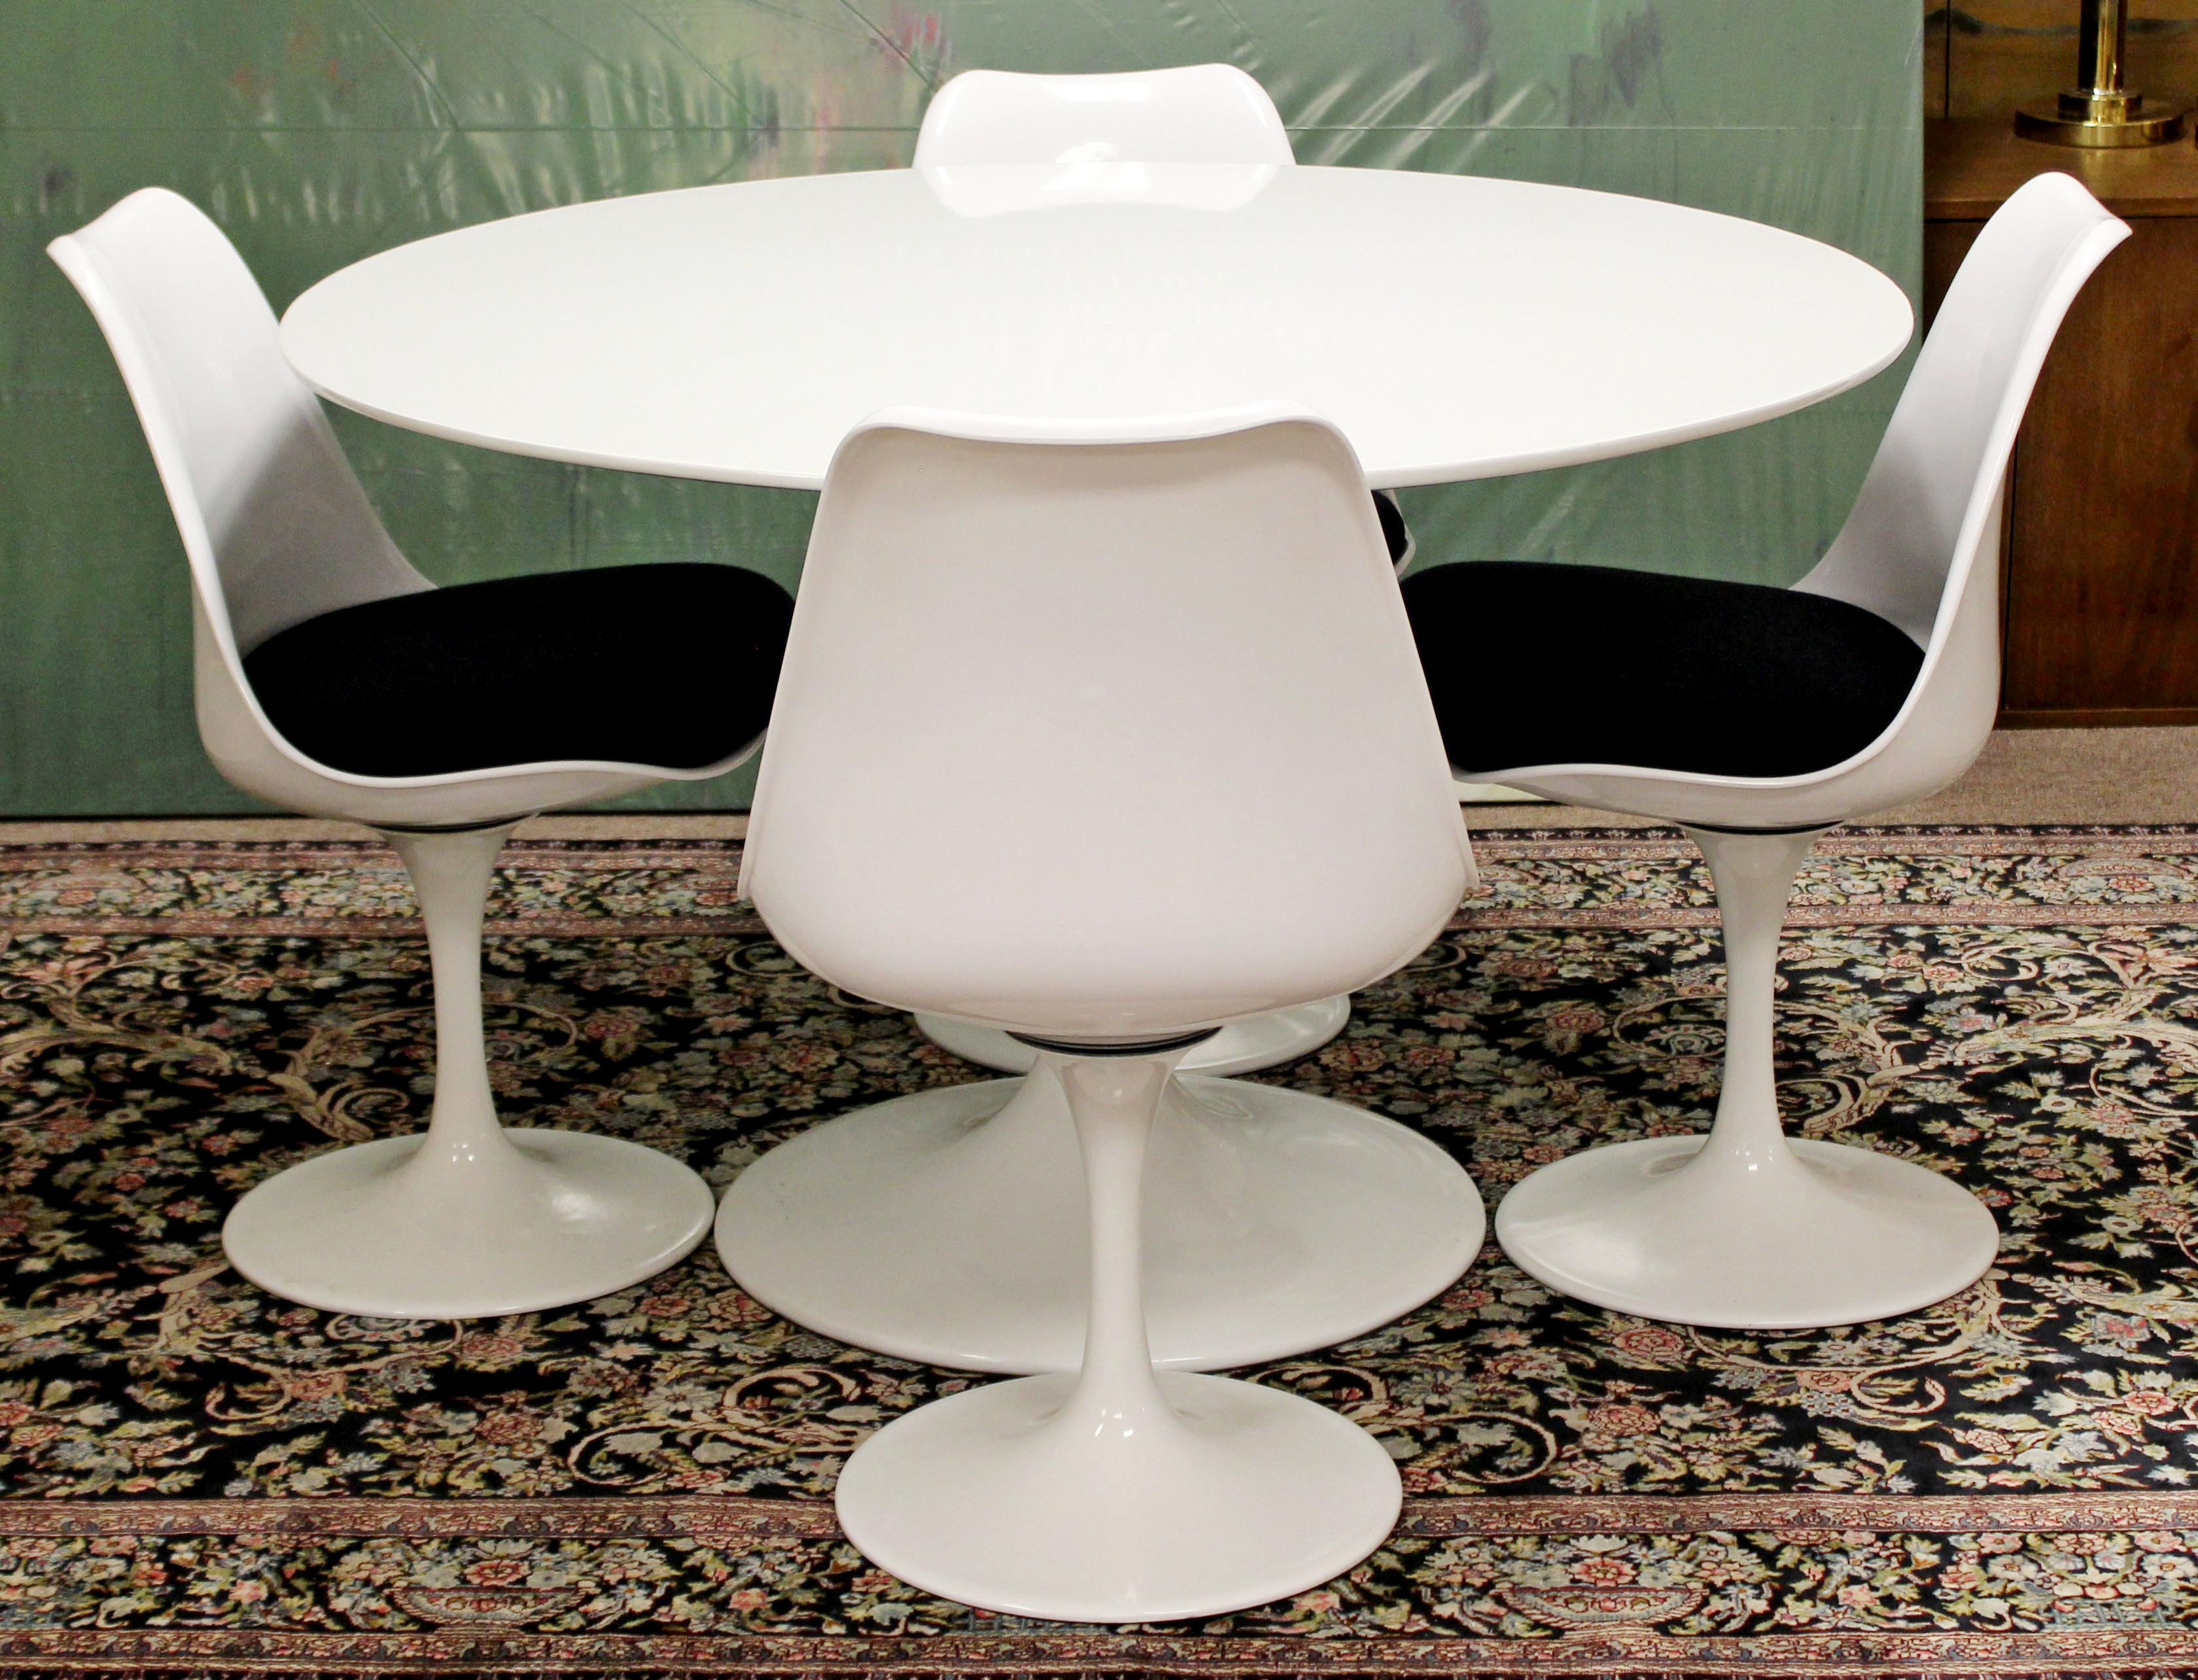 For your consideration is a fabulous, white, tulip dining set, with four chairs, in the style of Eero Saarinen, by Burke, circa the 1960s. In very good condition. The dimensions of the table are 47.5